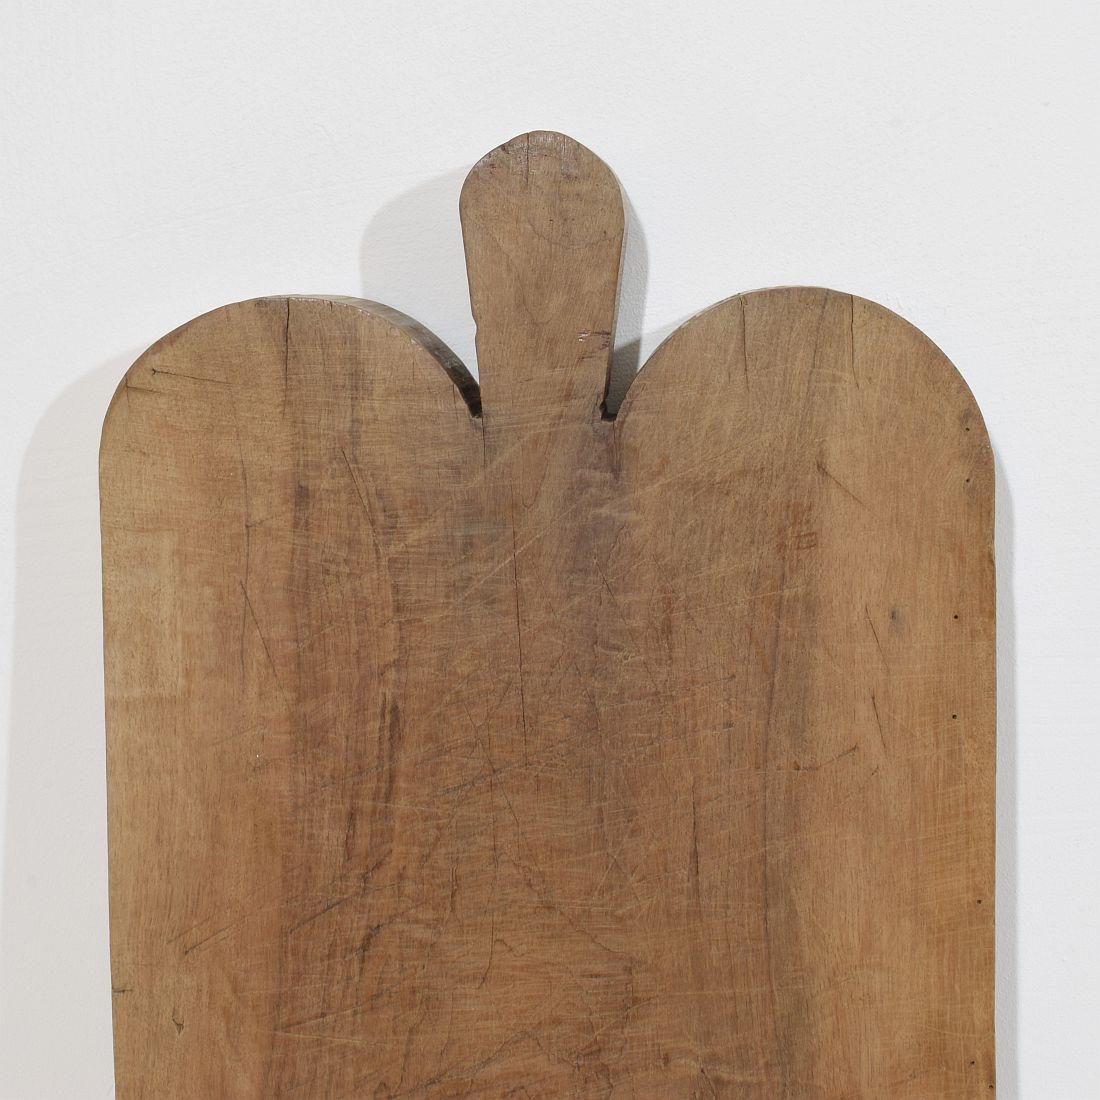 French 19th Century, Thick Wooden Chopping or Cutting Board 5